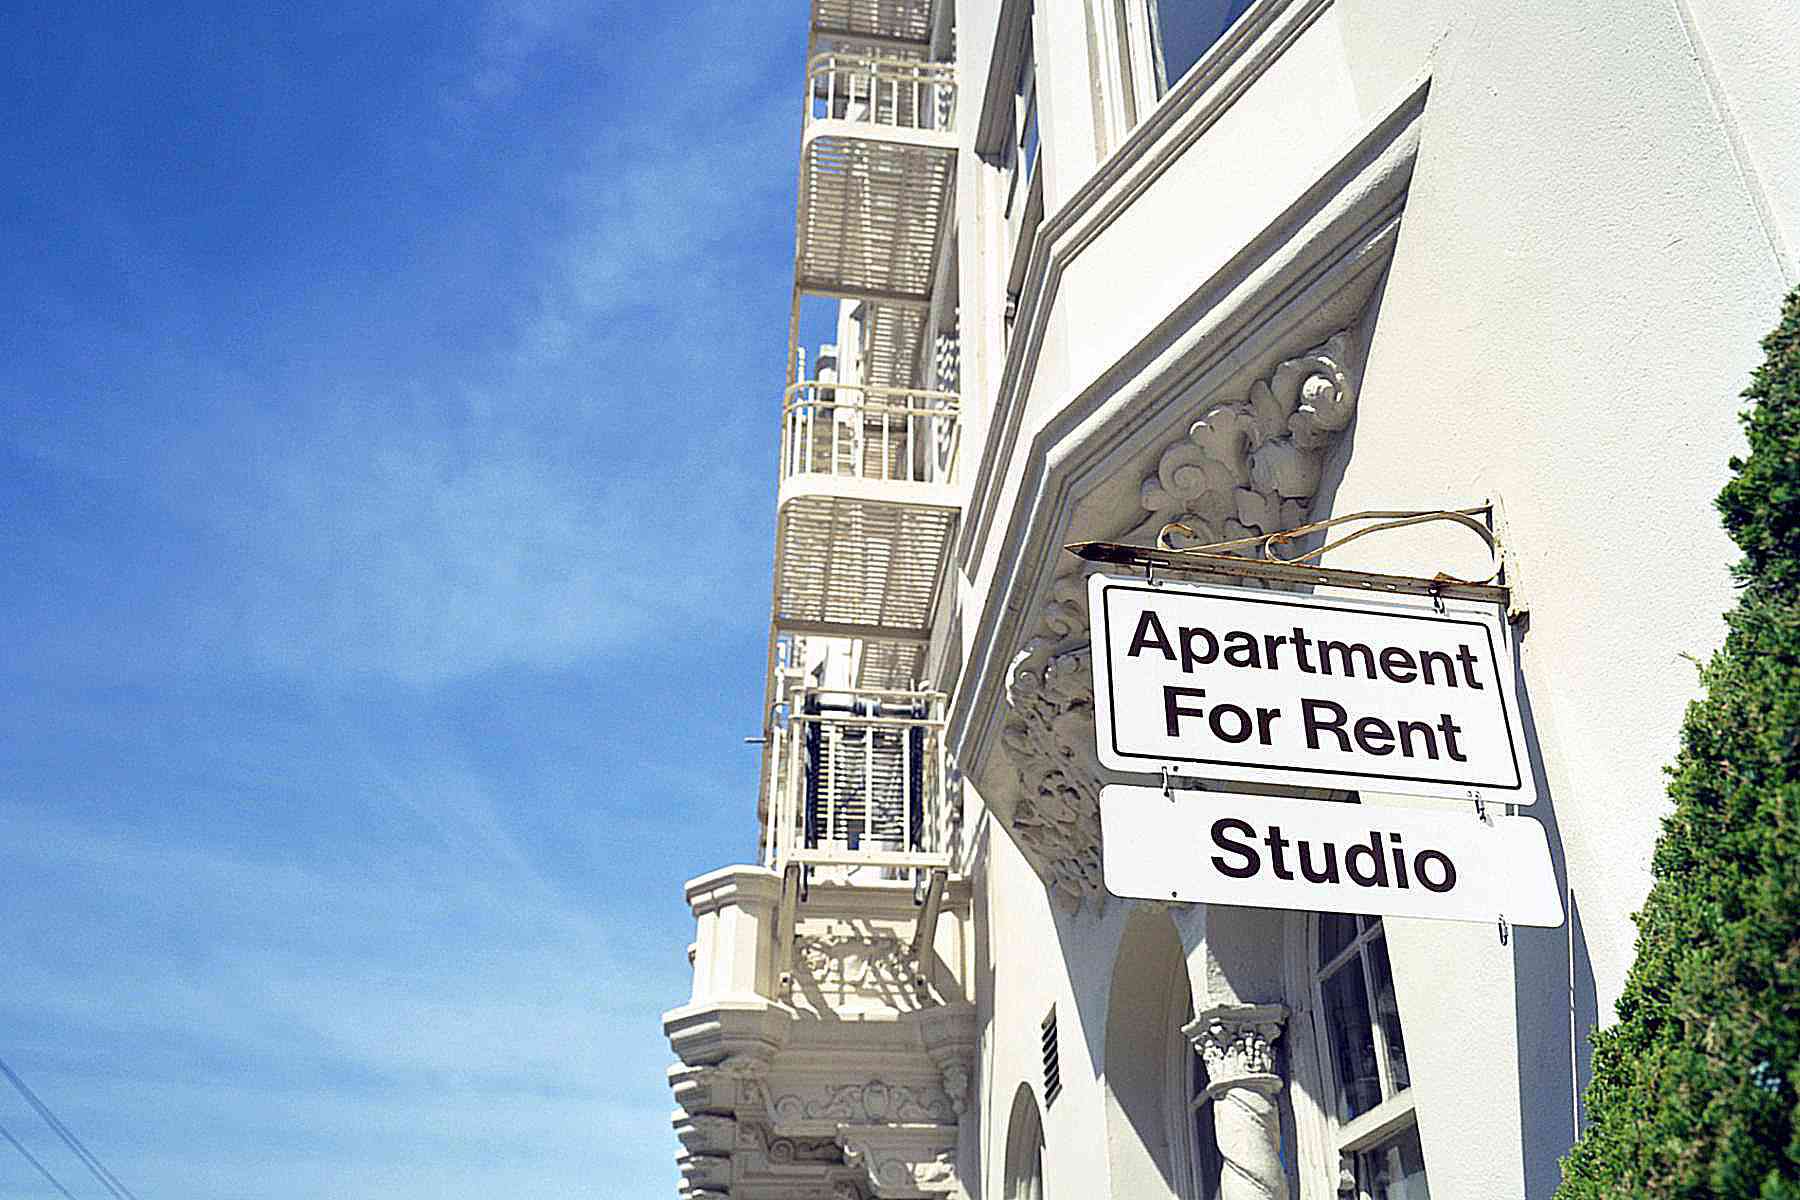 Apartment for Rent sign on building